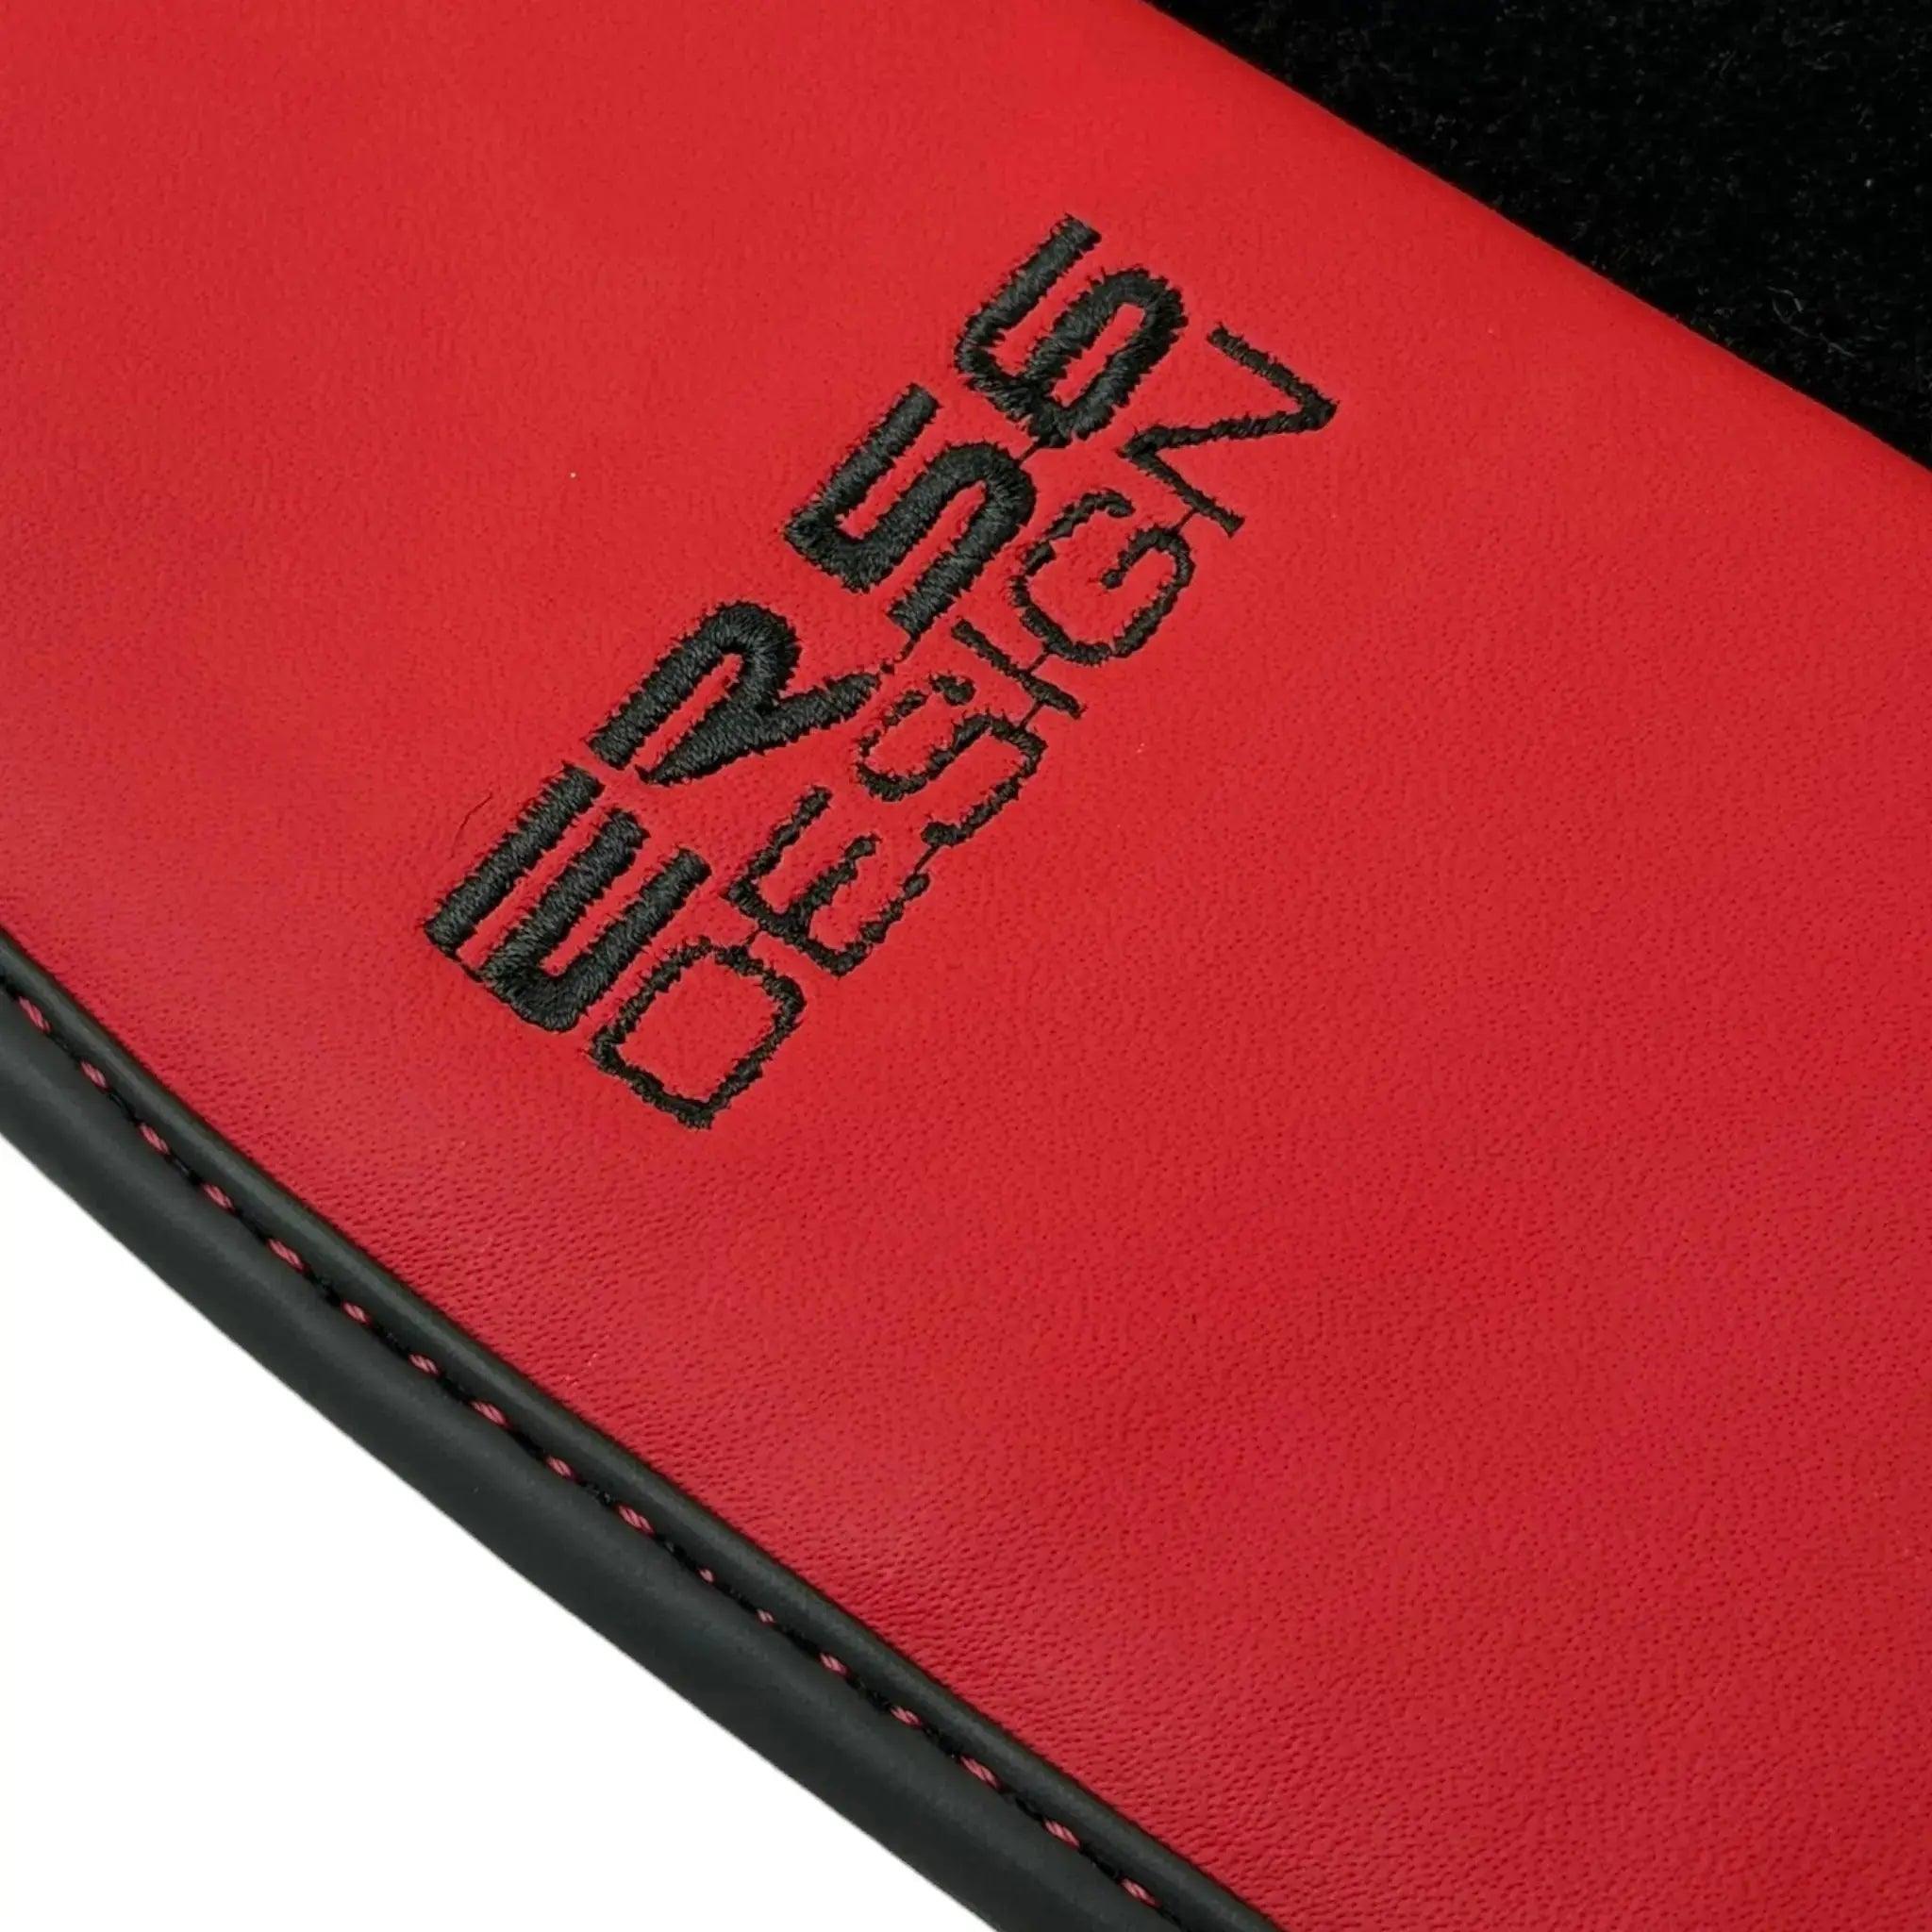 Black Floor Mats for Bentley Continental GTC (2011–2018) with Red Leather | ER56 Design